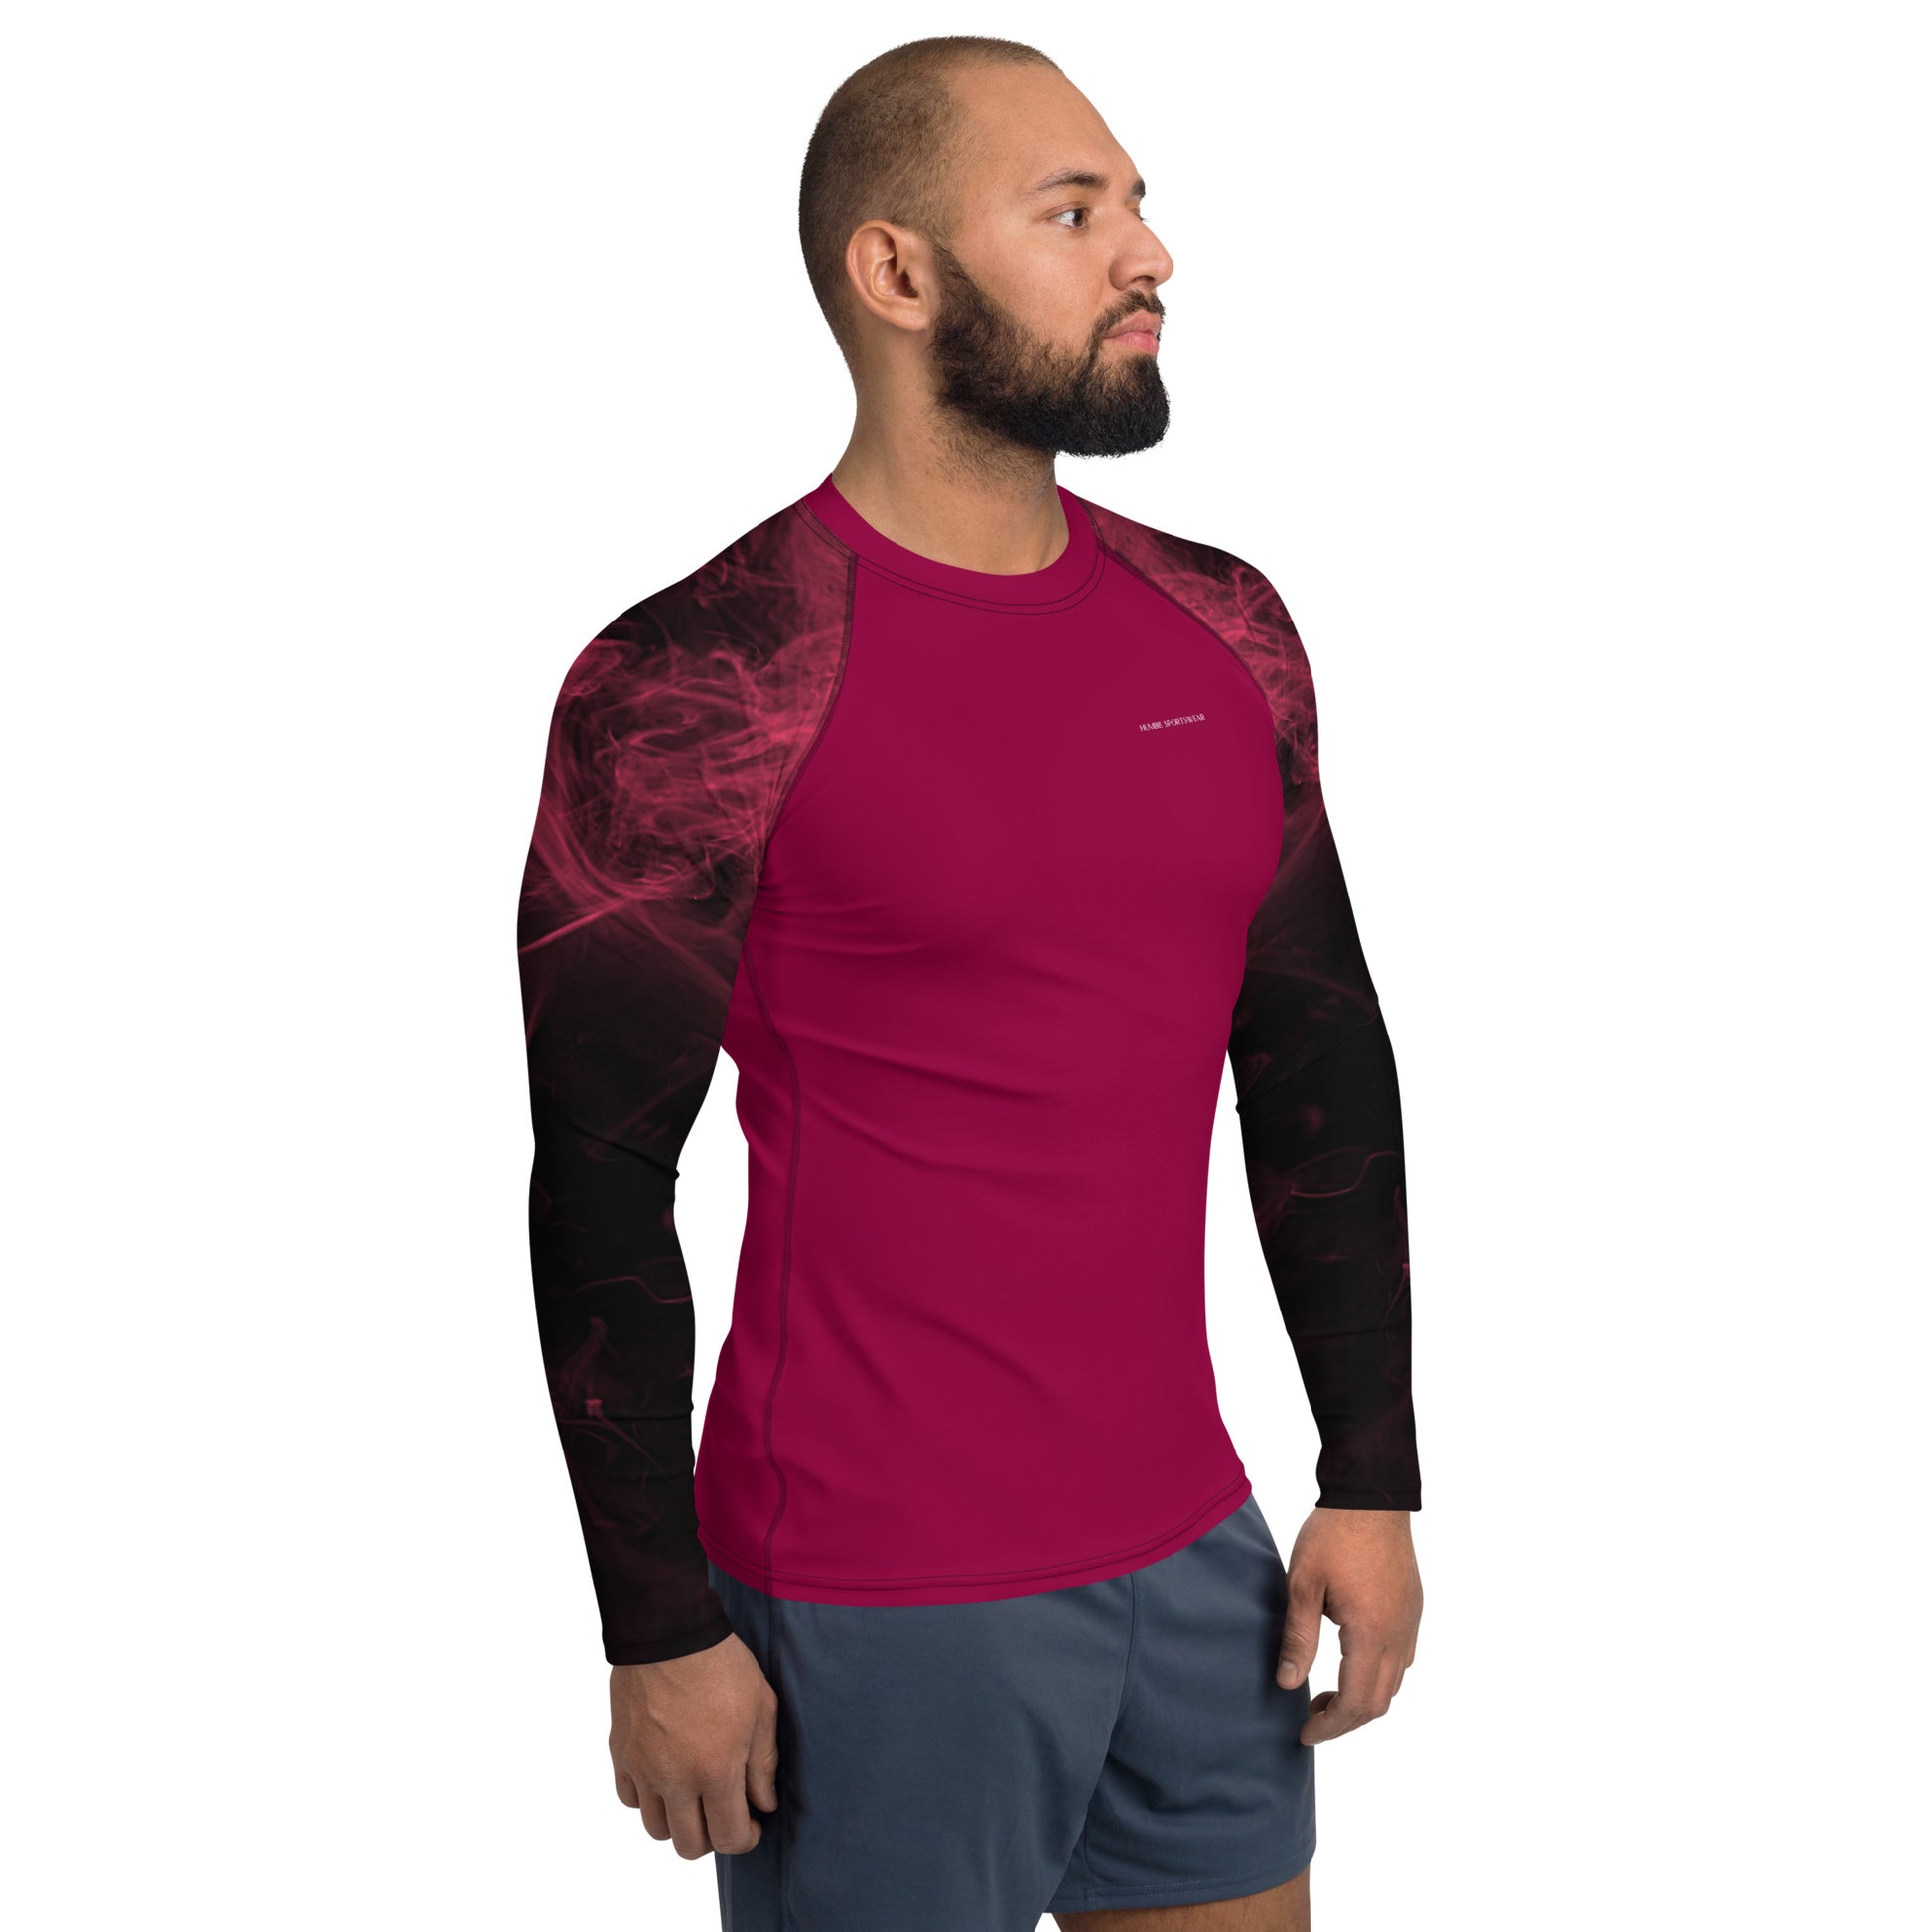 Humble Sportswear, men's color match activewear long sleeve compression rash guard, all-over print top